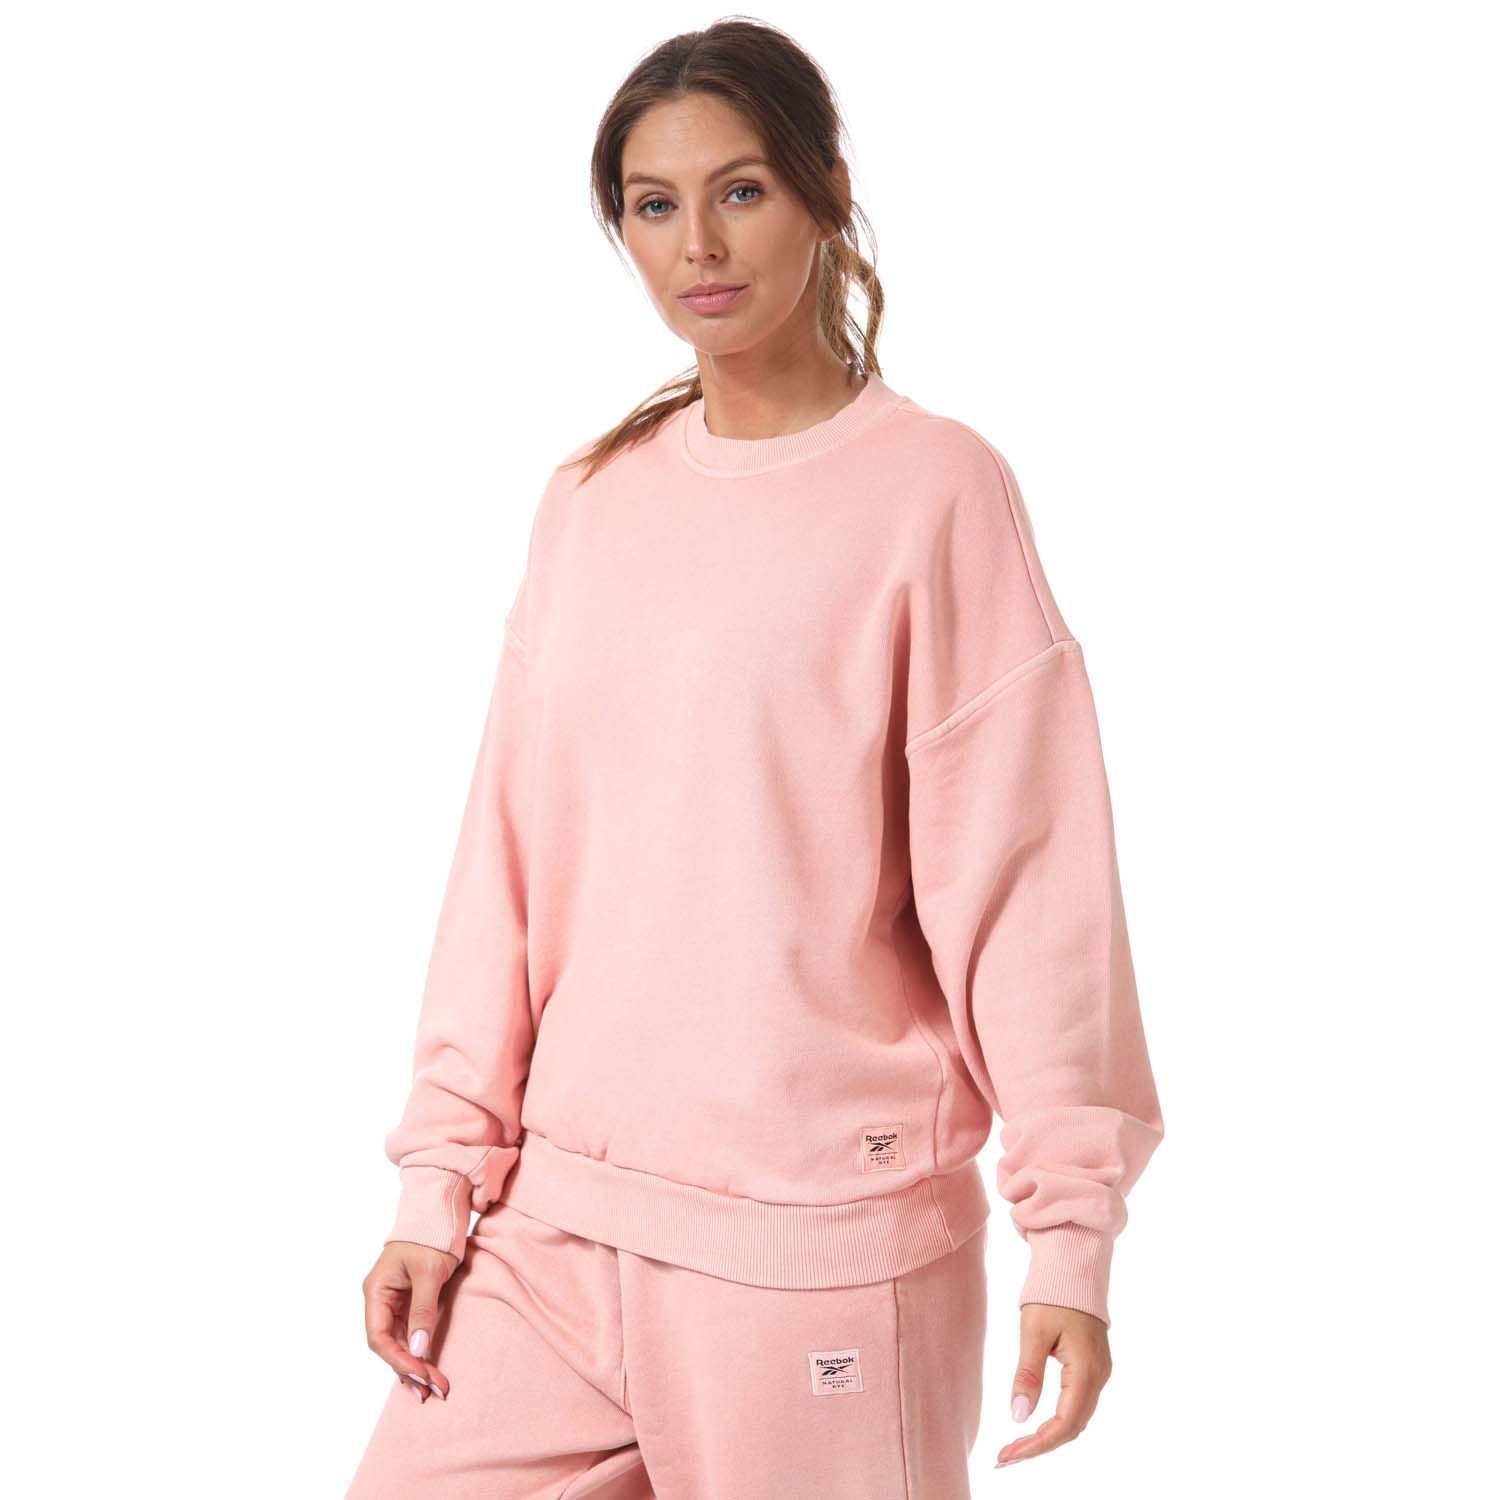 Womens Reebok Classics Natural Dye Sweatshirt in berry.- Ribbed crew neck.- Drop shoulders.- Ribbed cuffs and hem.- Responsibly designed with organic cotton.- Oversize fit.- Main Material: 100% Organic Cotton. Rib Part: 95% Organic Cotton  5% Elastane.- Ref:GS8921